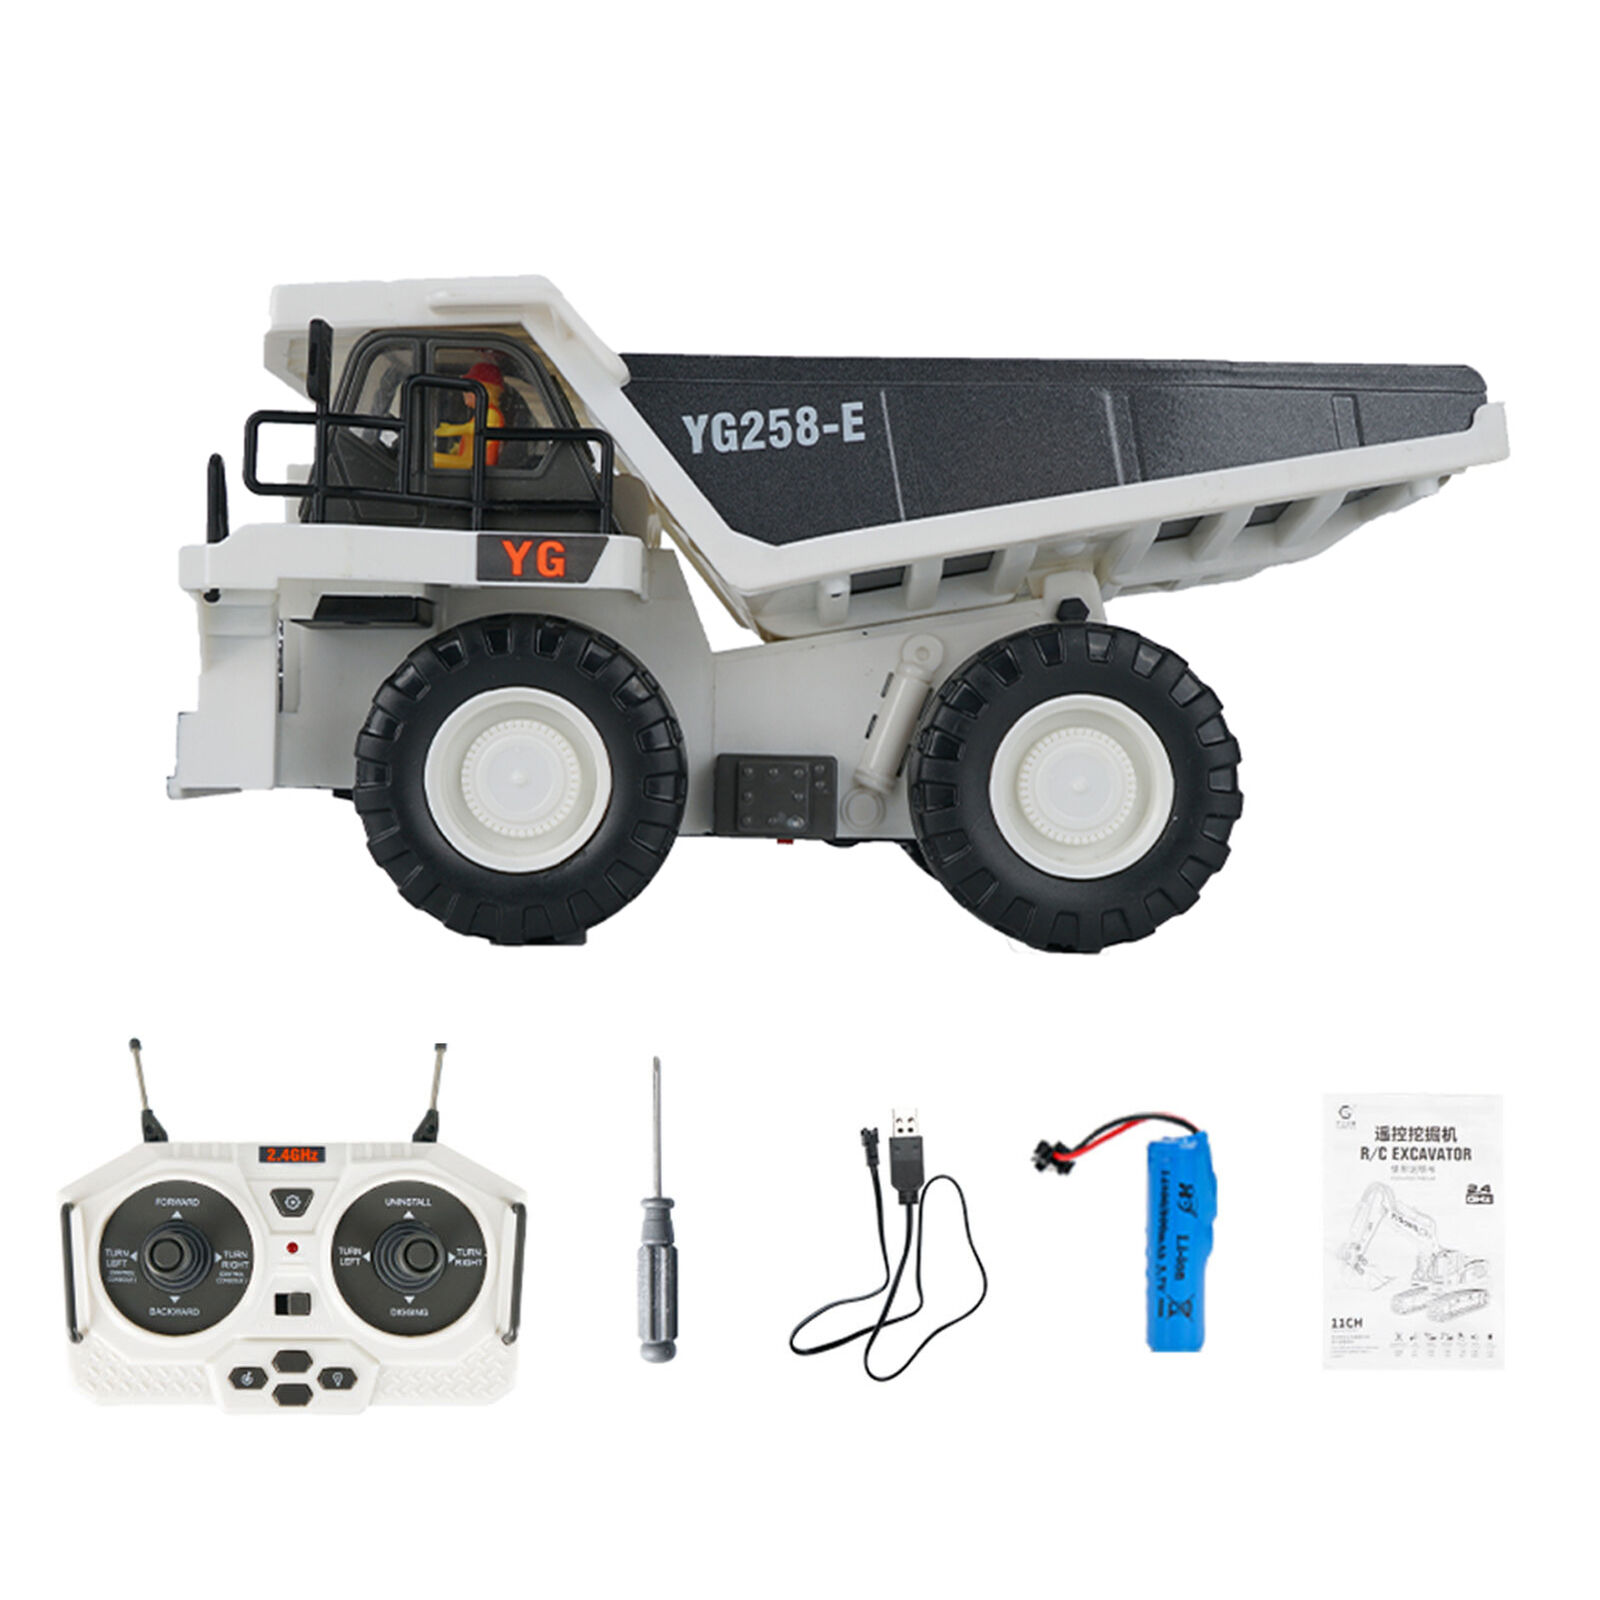 TOP HOT BEST RC Construction Vehicle Toys, High Simulation RC Dump Truck Toy with LED Light  Sound 2.4G RC Construction Truck Toy  for Kids